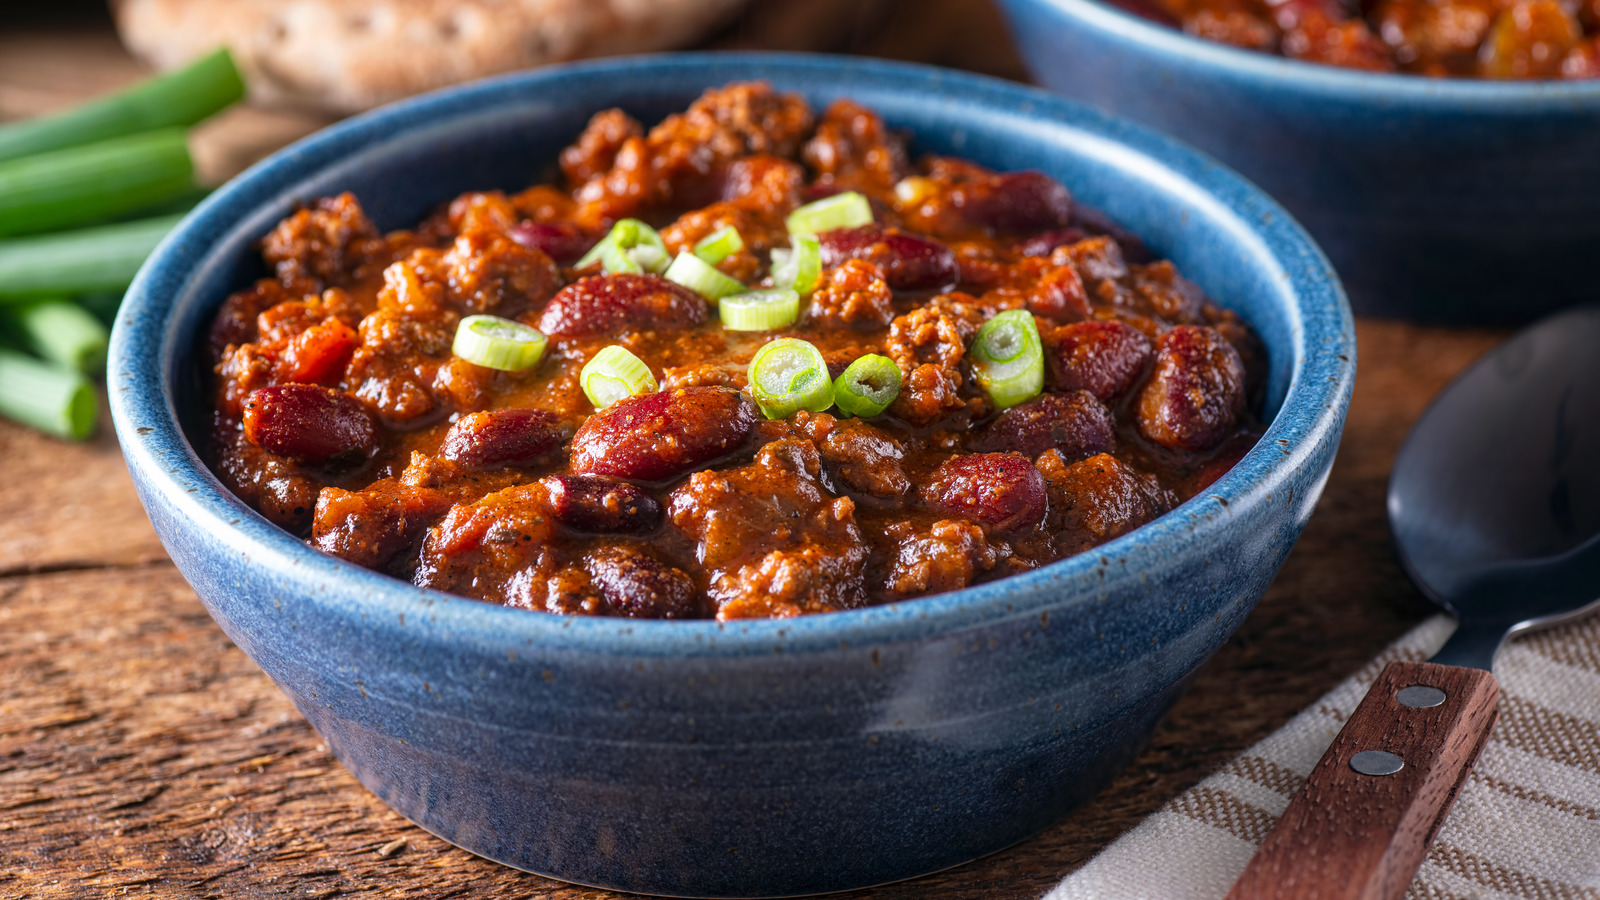 The Reason You Should Always Buy Low-Sodium Canned Chili